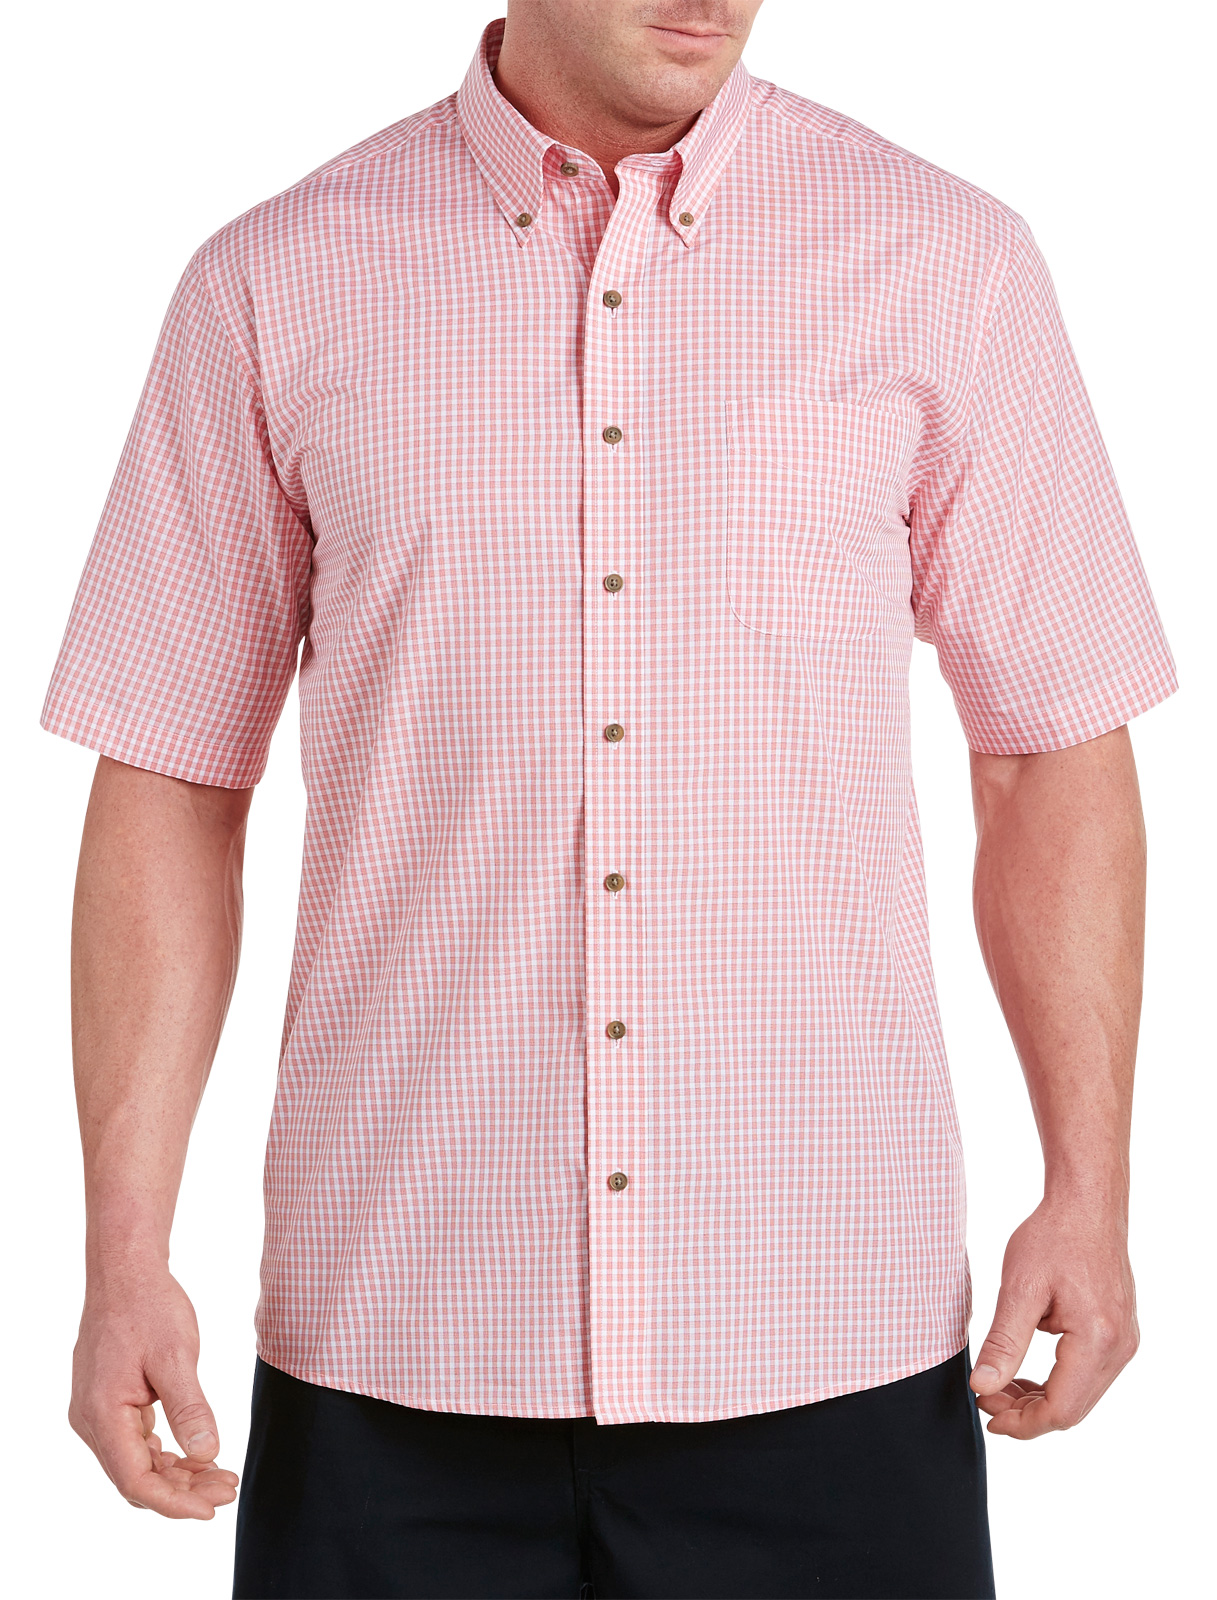 Harbor Bay Men's Big and Tall Easy-Care Small Check Sport Shirt